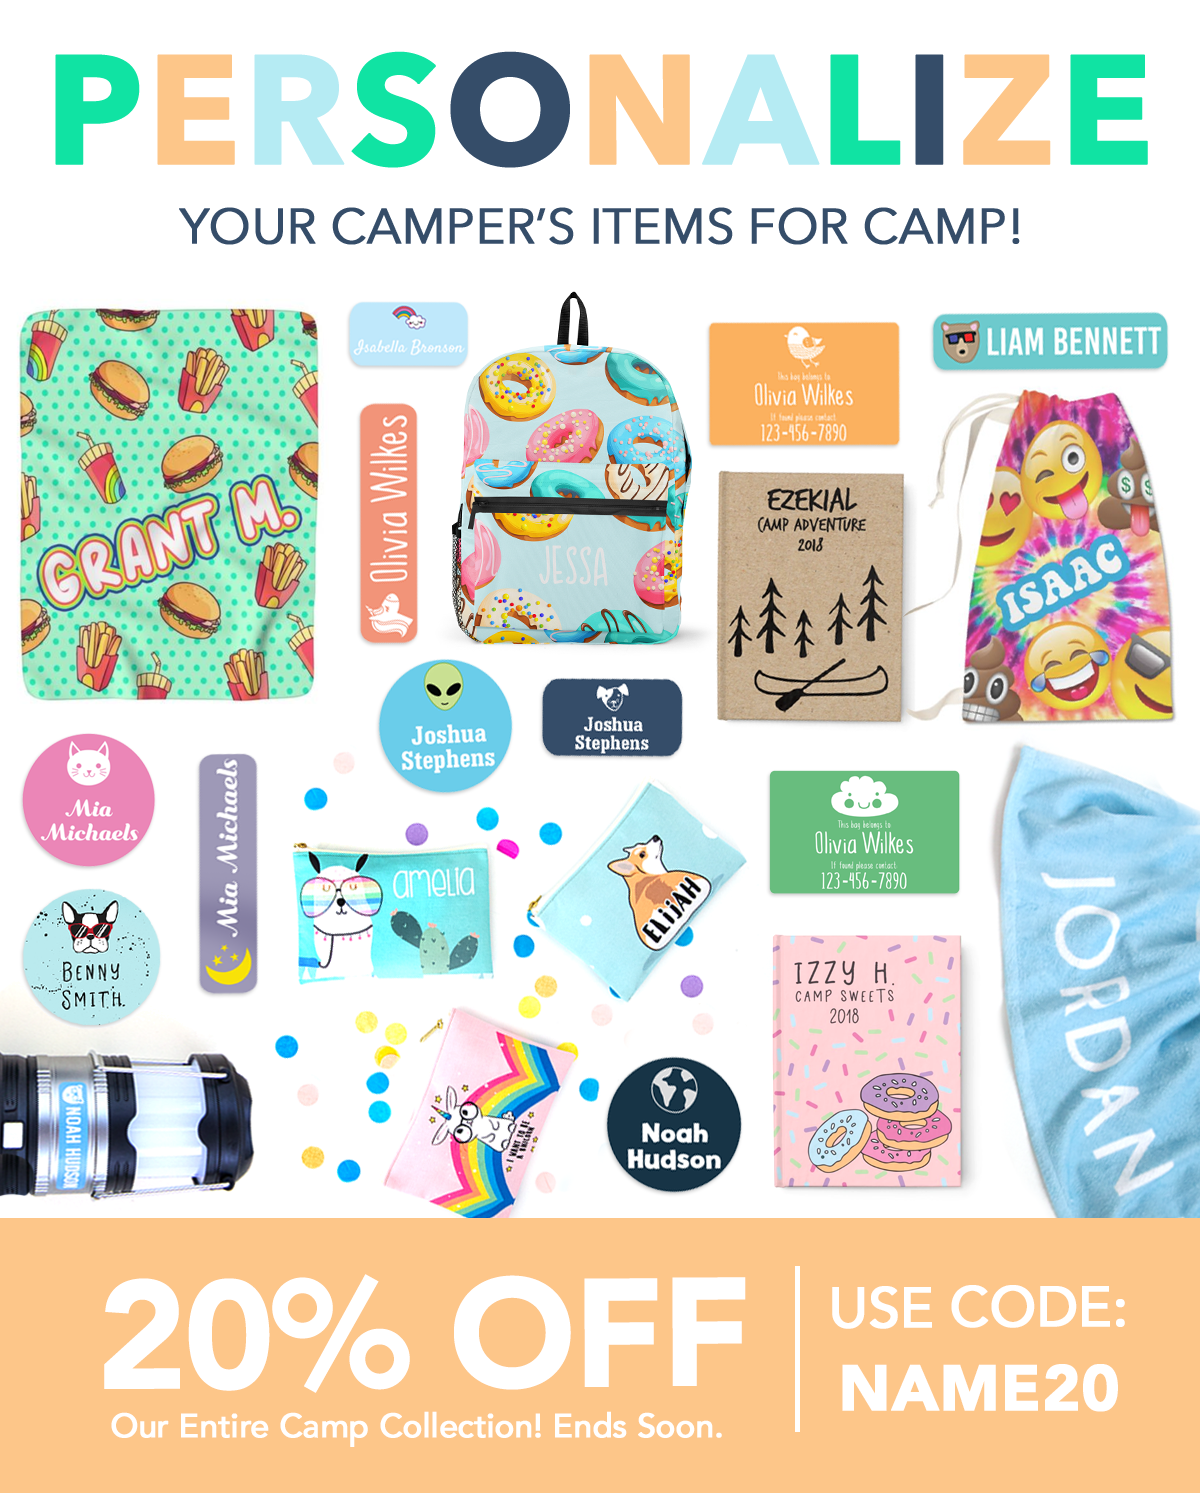 Get 20% off our Camp Collection with Code: NAME20 